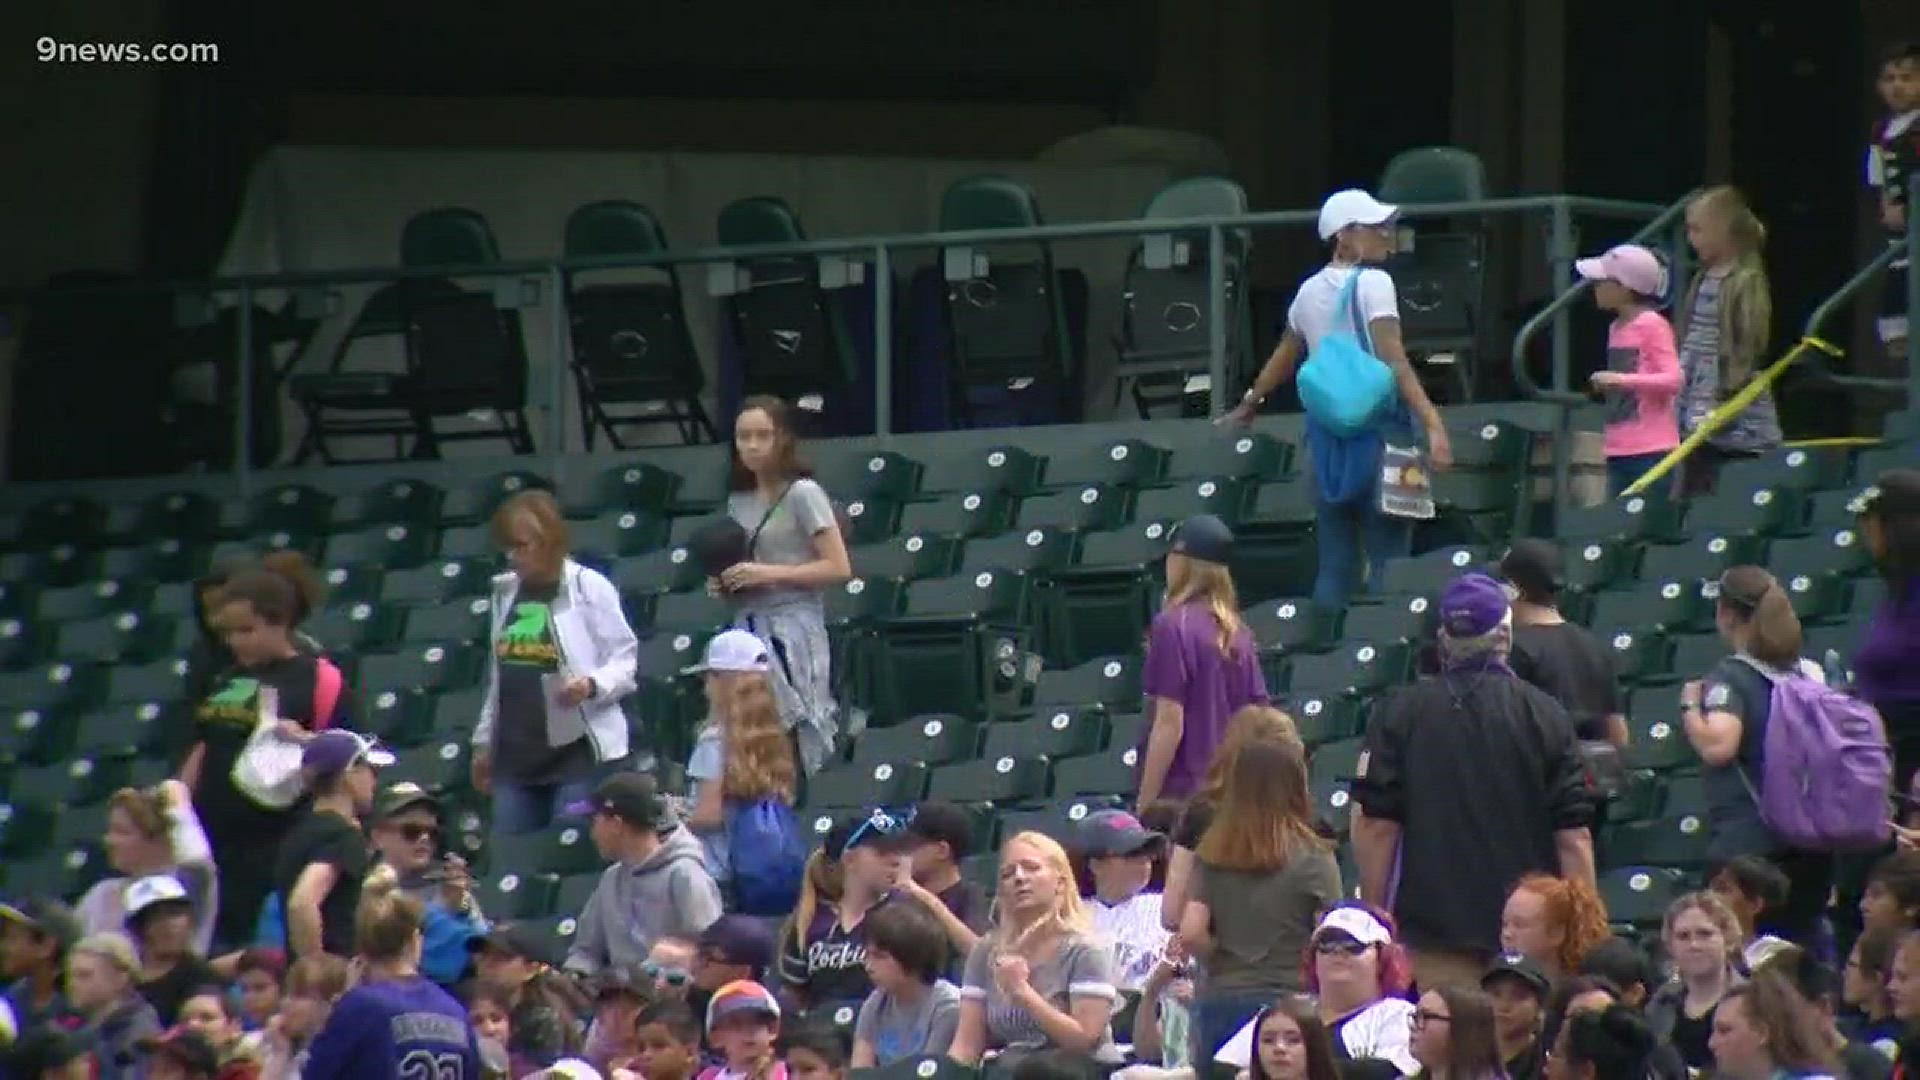 The Colorado Rockies, Steve Spangler Science, 9NEWS and Colorado State University teamed up to launch the 10th Annual Weather and Science Day at Coors Field.